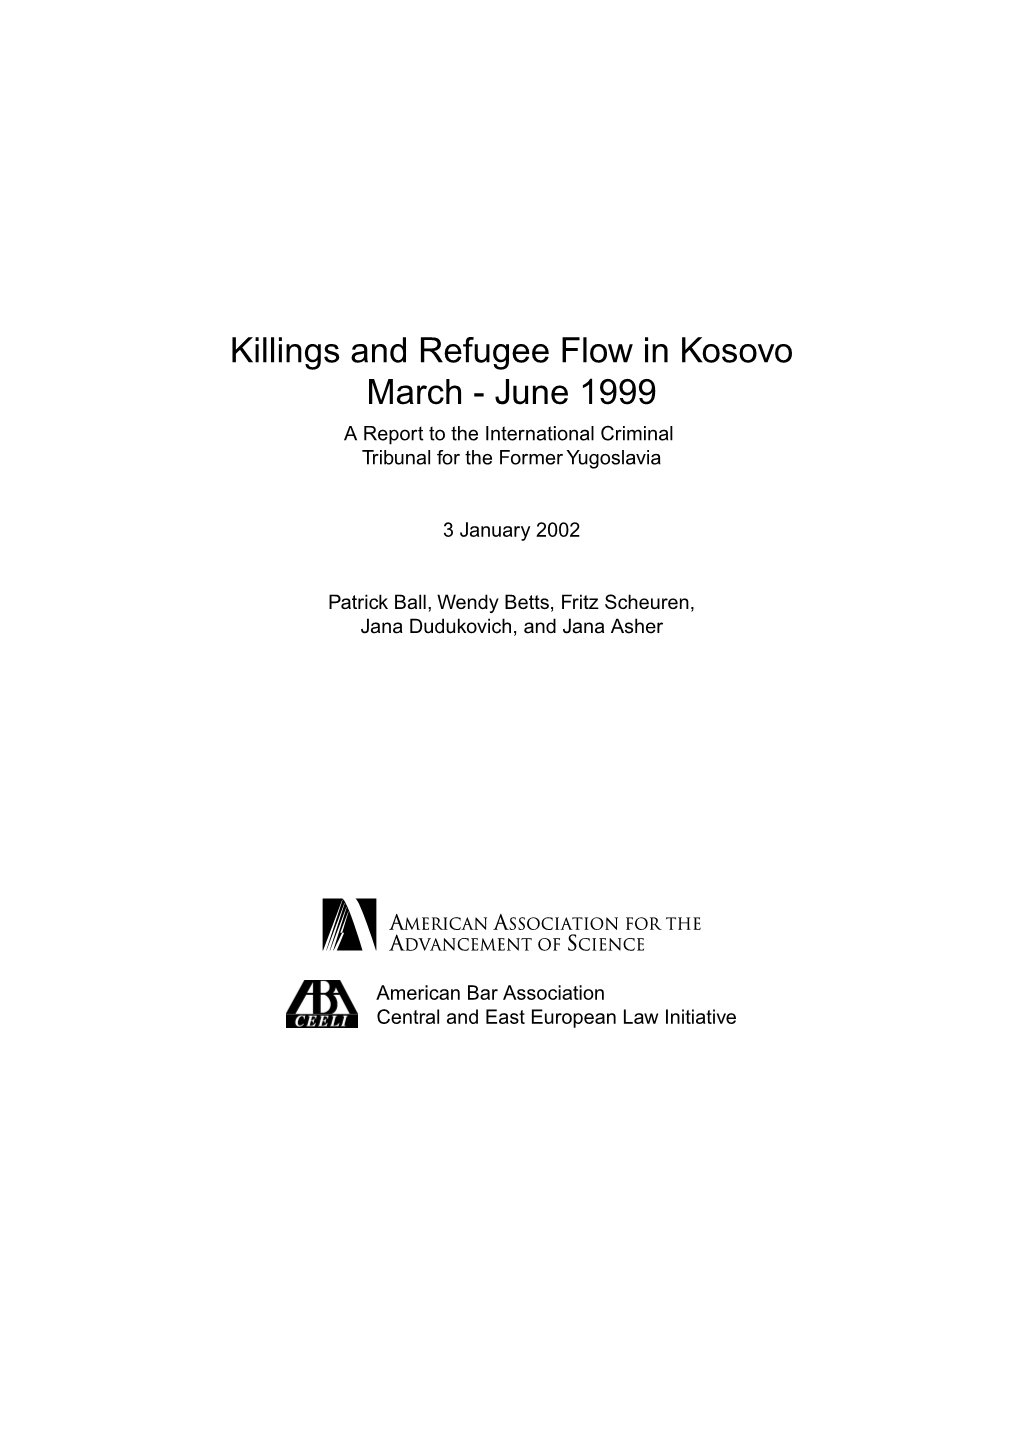 Killings and Refugee Flow in Kosovo March - June 1999 a Report to the International Criminal Tribunal for the Former Yugoslavia